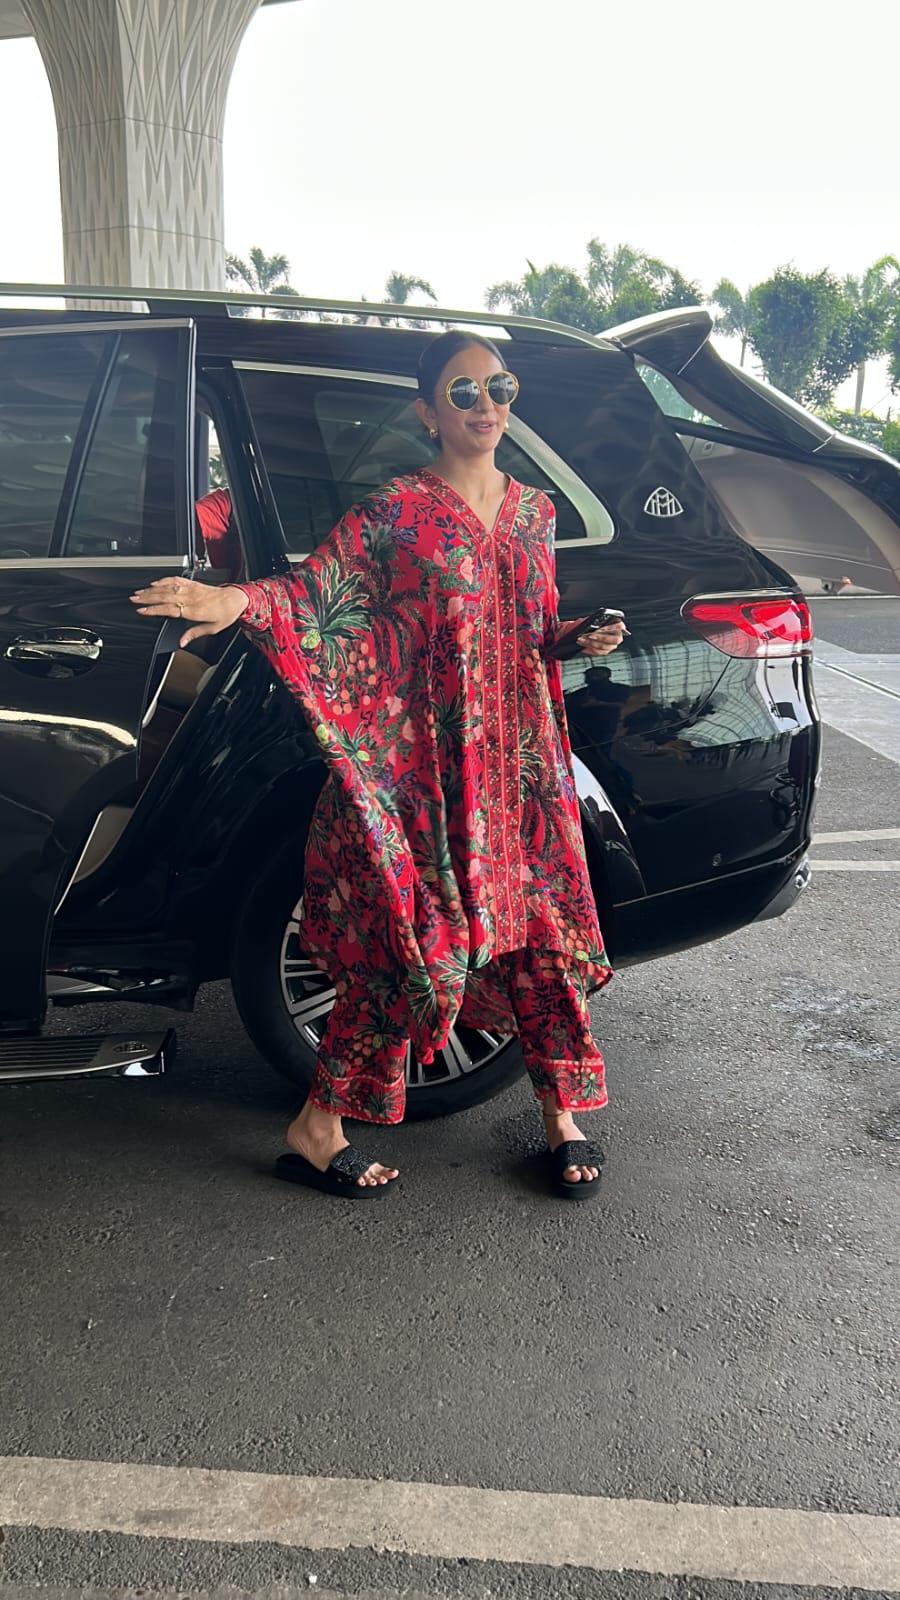 Rakul Preet Singh opted for a red kaftan-style kurta set for her airport look